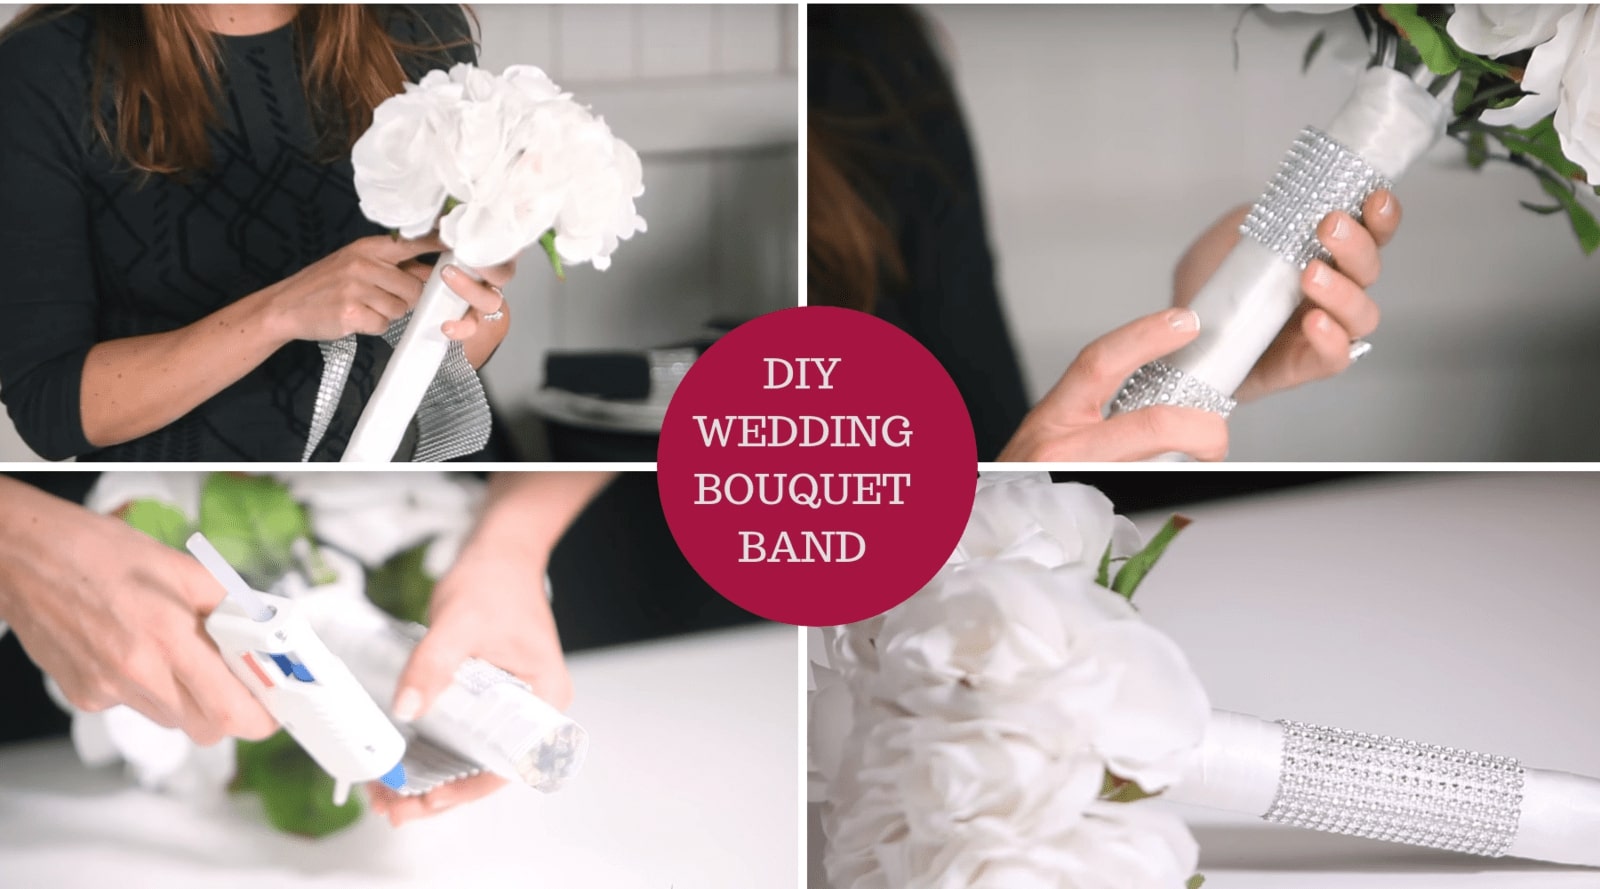 DIY Wedding Bouquet Band with Bling